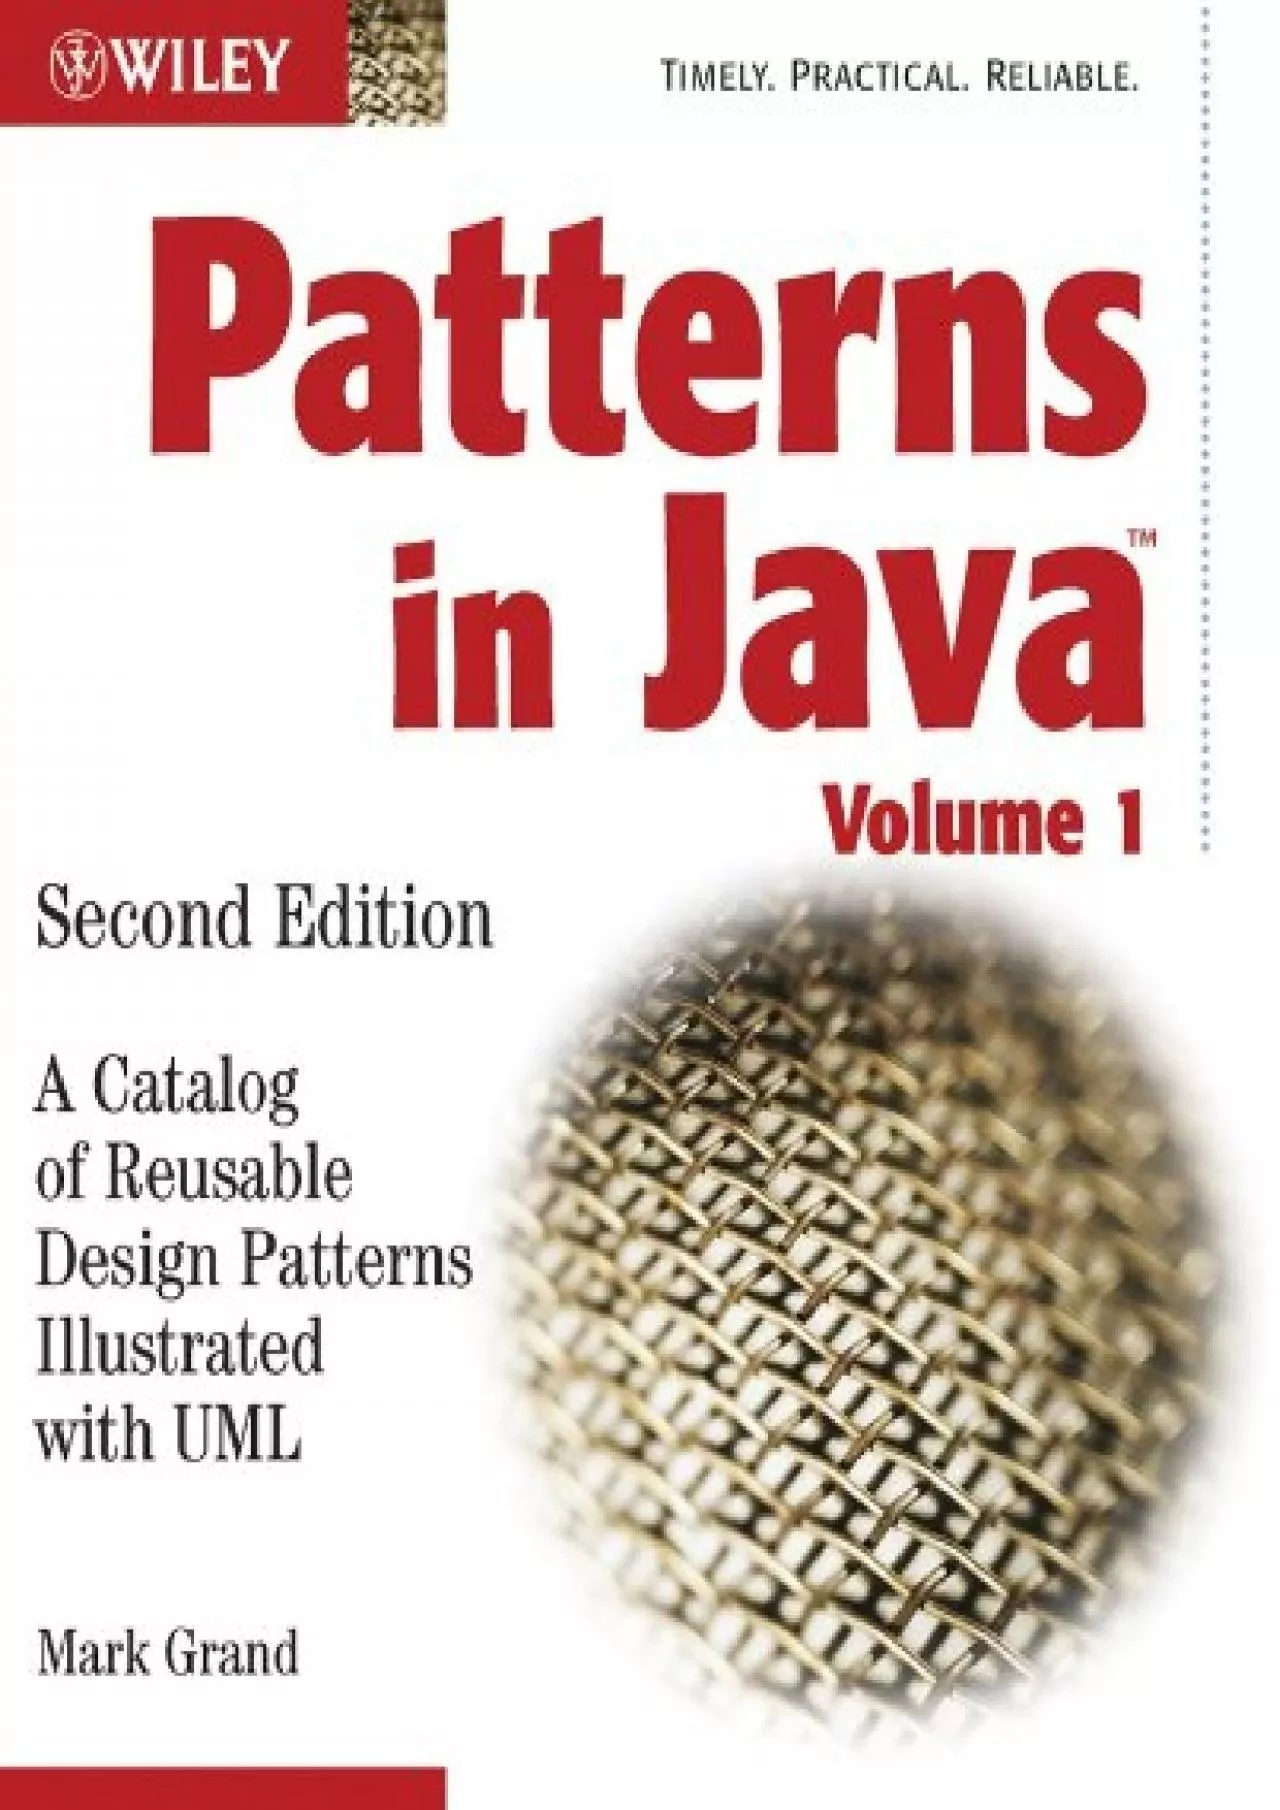 [PDF]-Patterns in Java: A Catalog of Reusable Design Patterns Illustrated with UML, 2nd